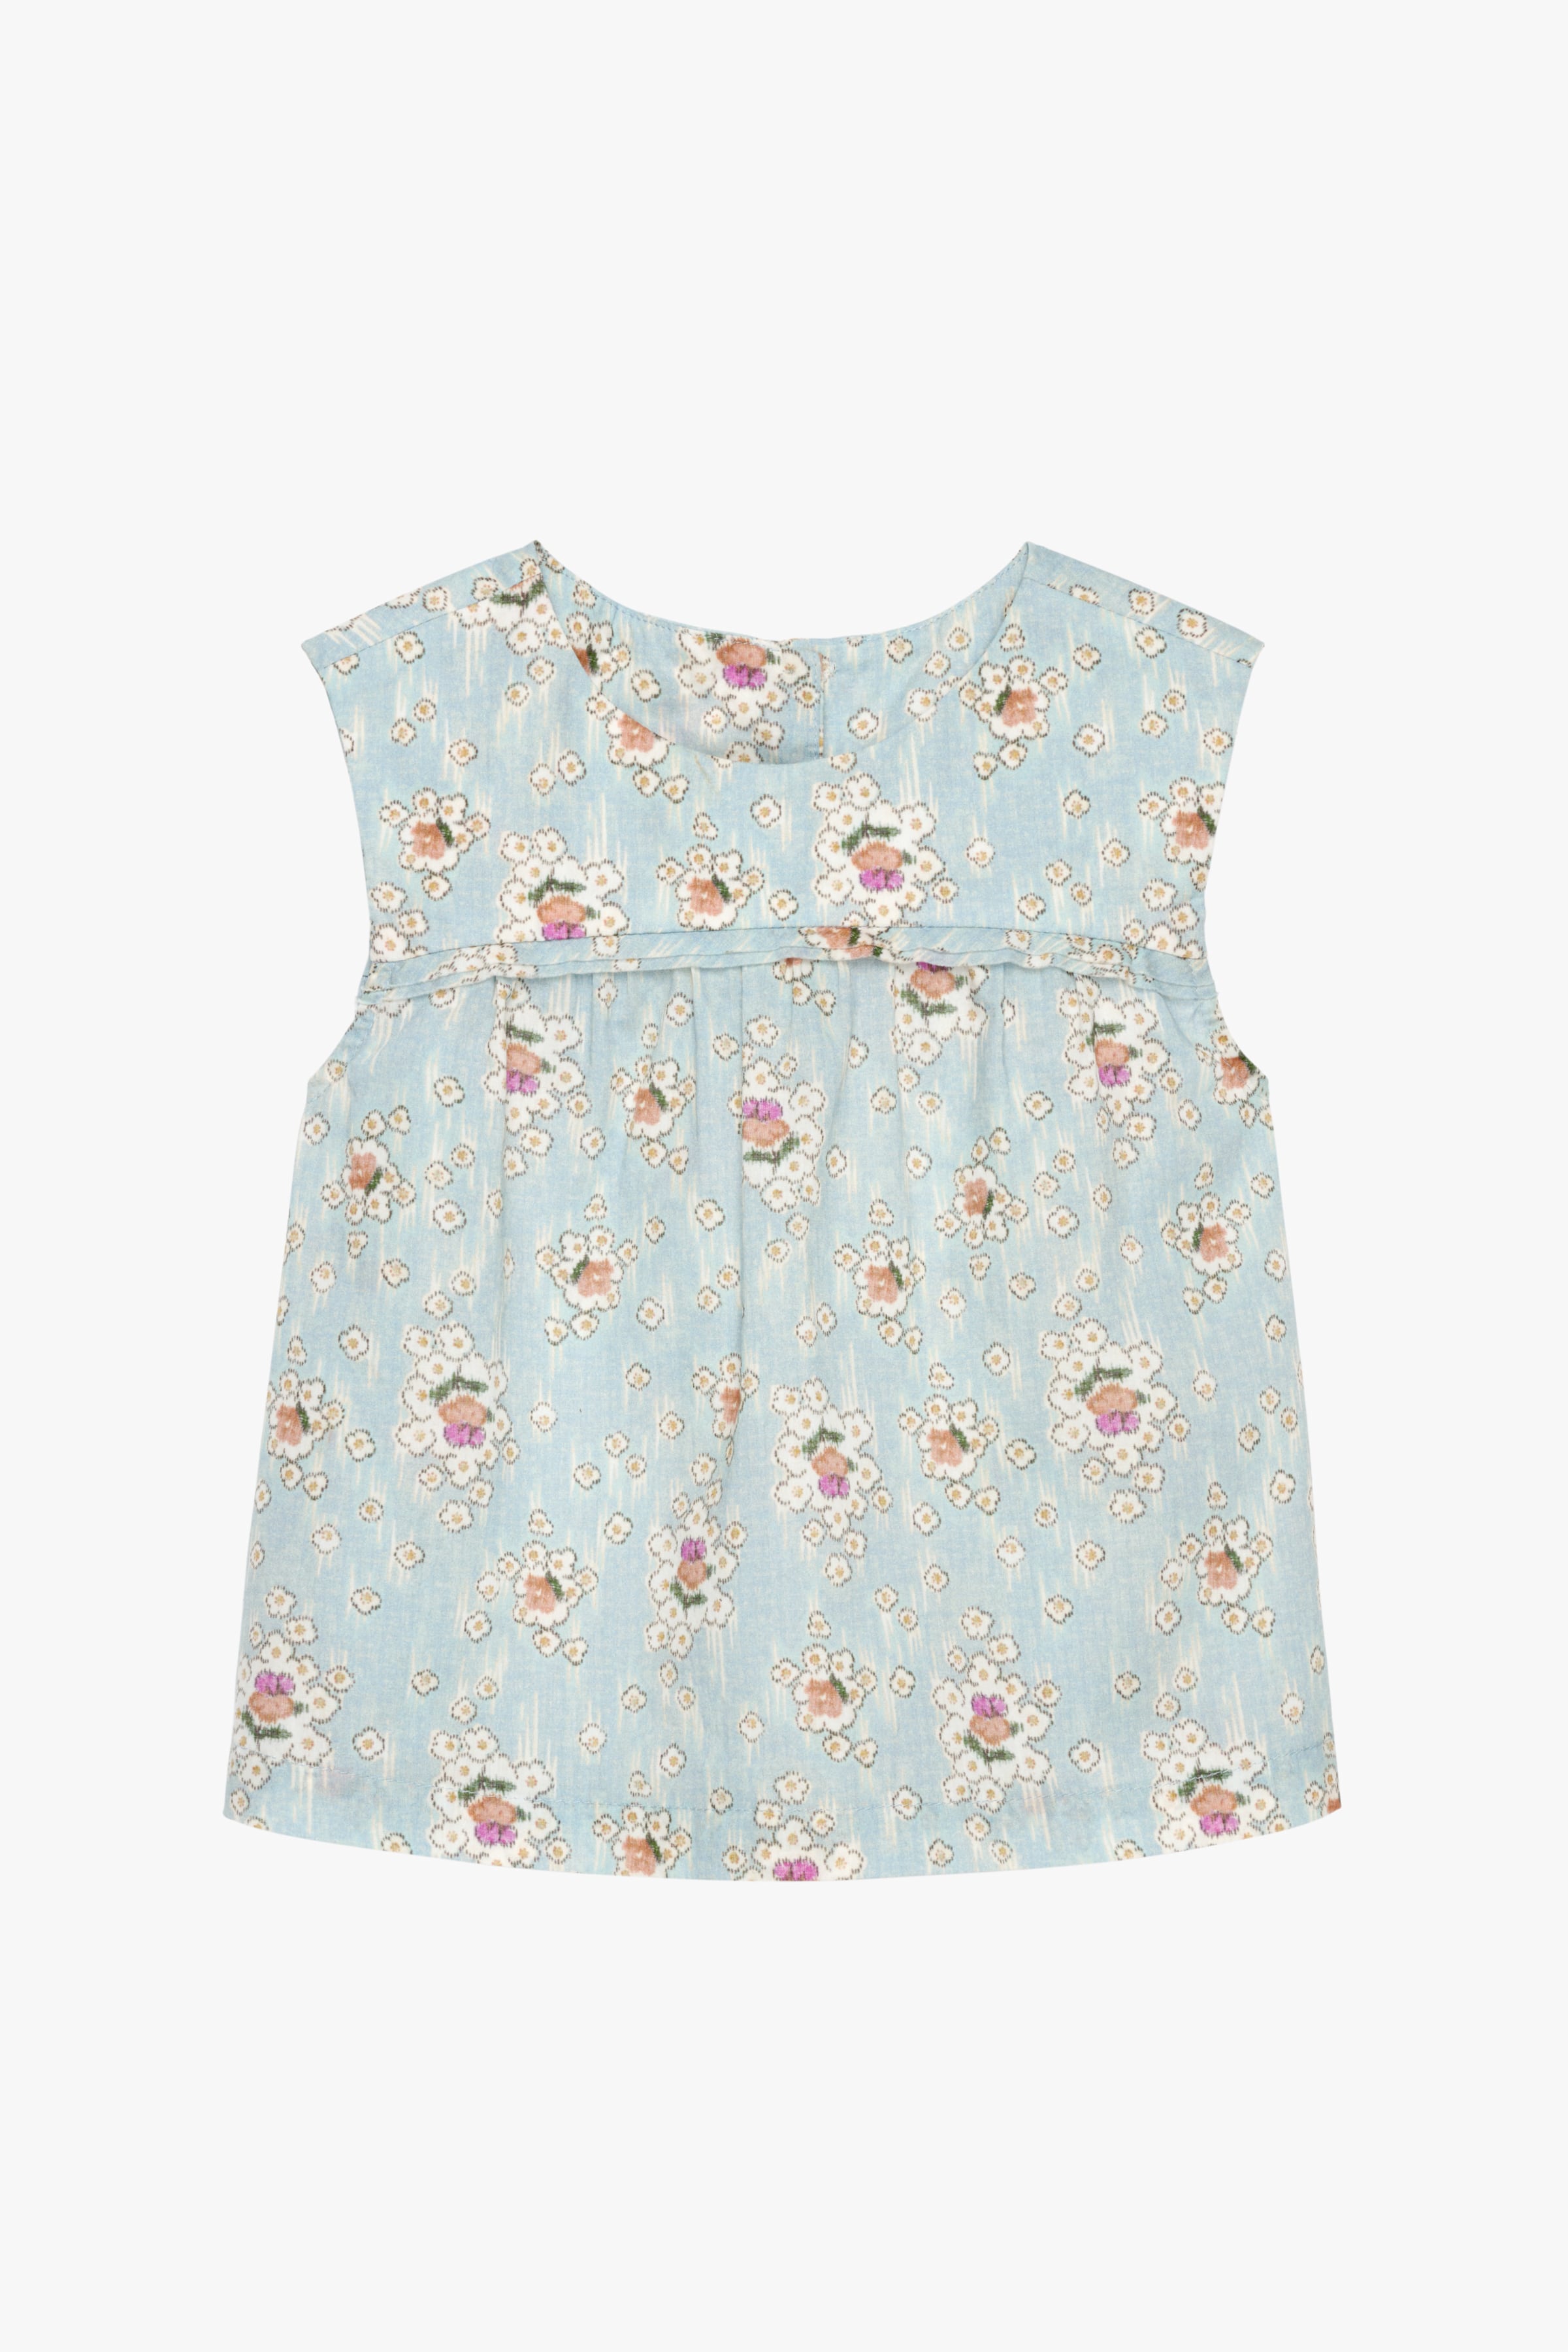 FLORAL PRINT TOP LIMITED EDITION